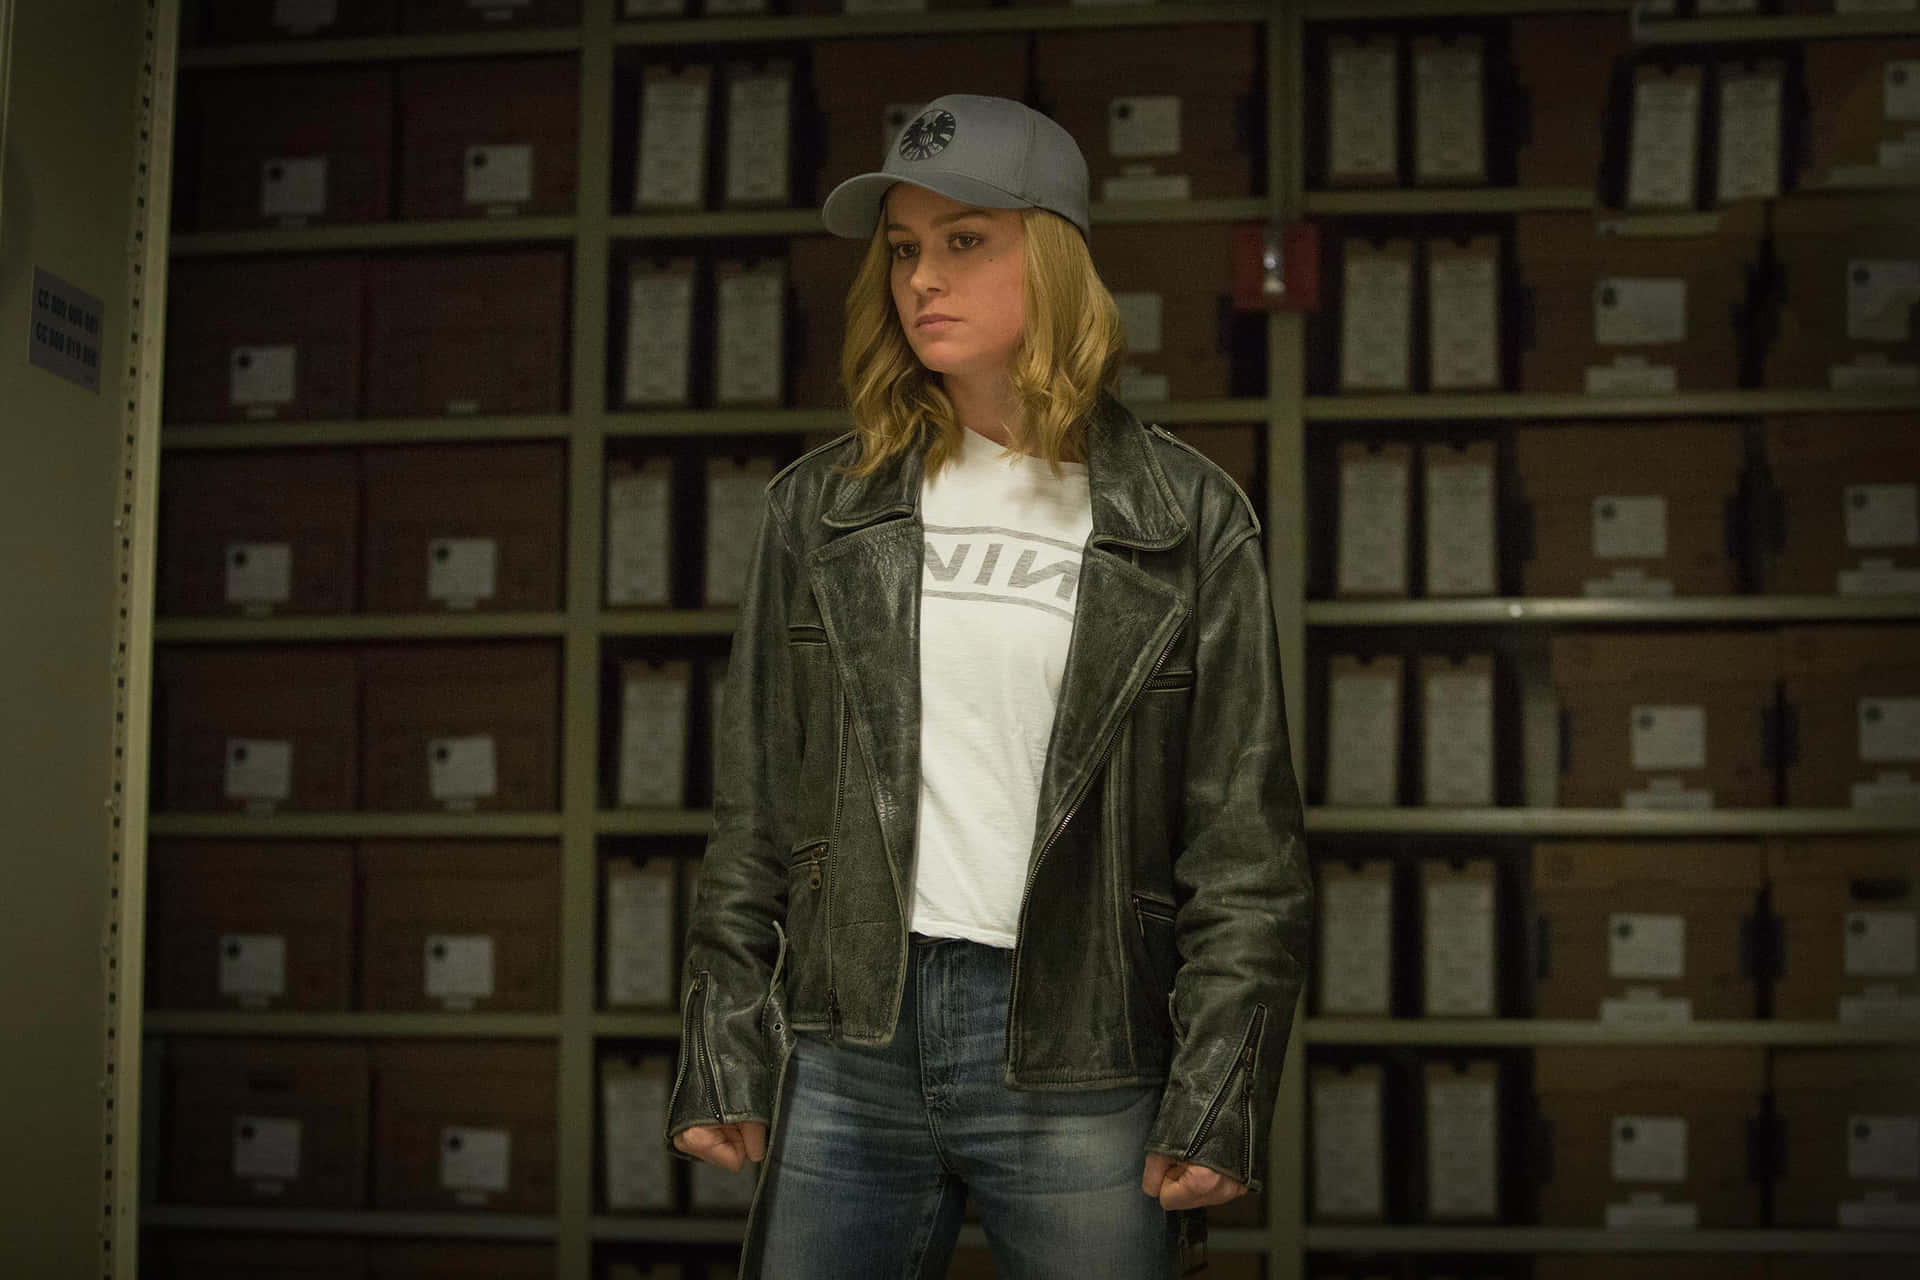 Brie Larson stars as Captain Marvel in the highly anticipated 2019 Marvel movie Wallpaper